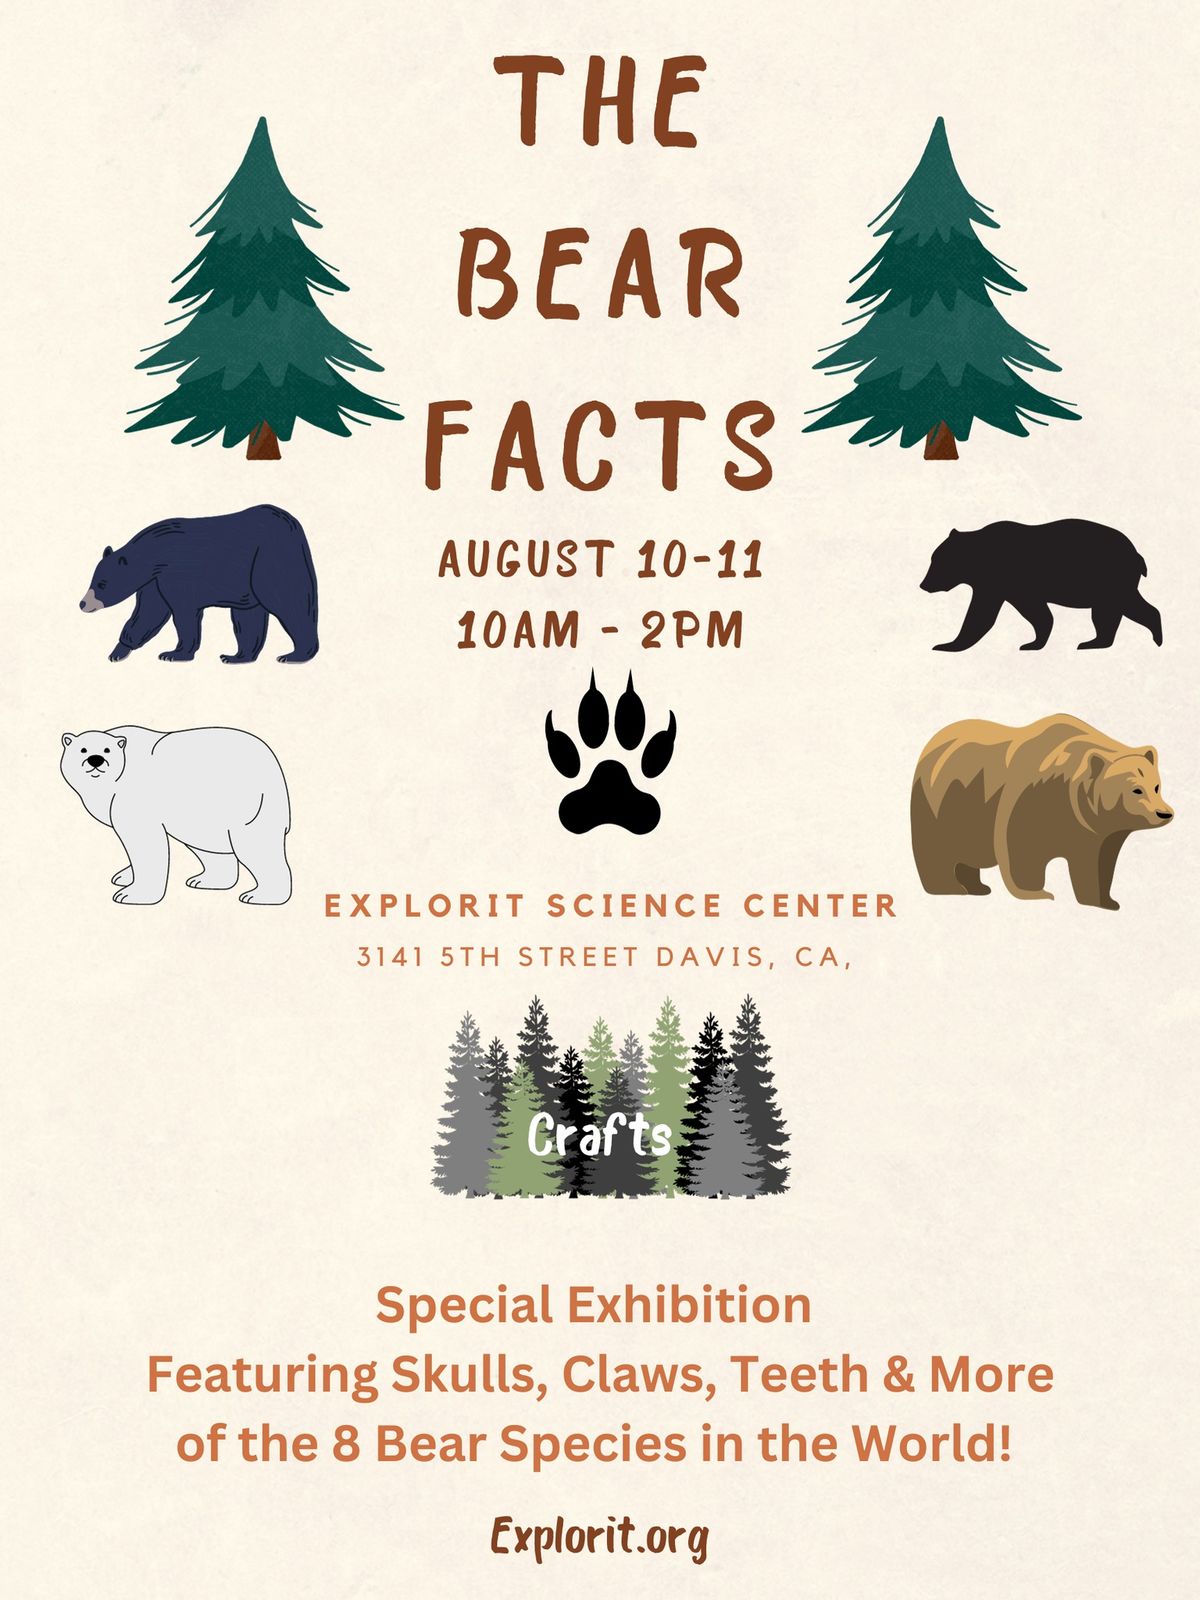 The Bear Facts